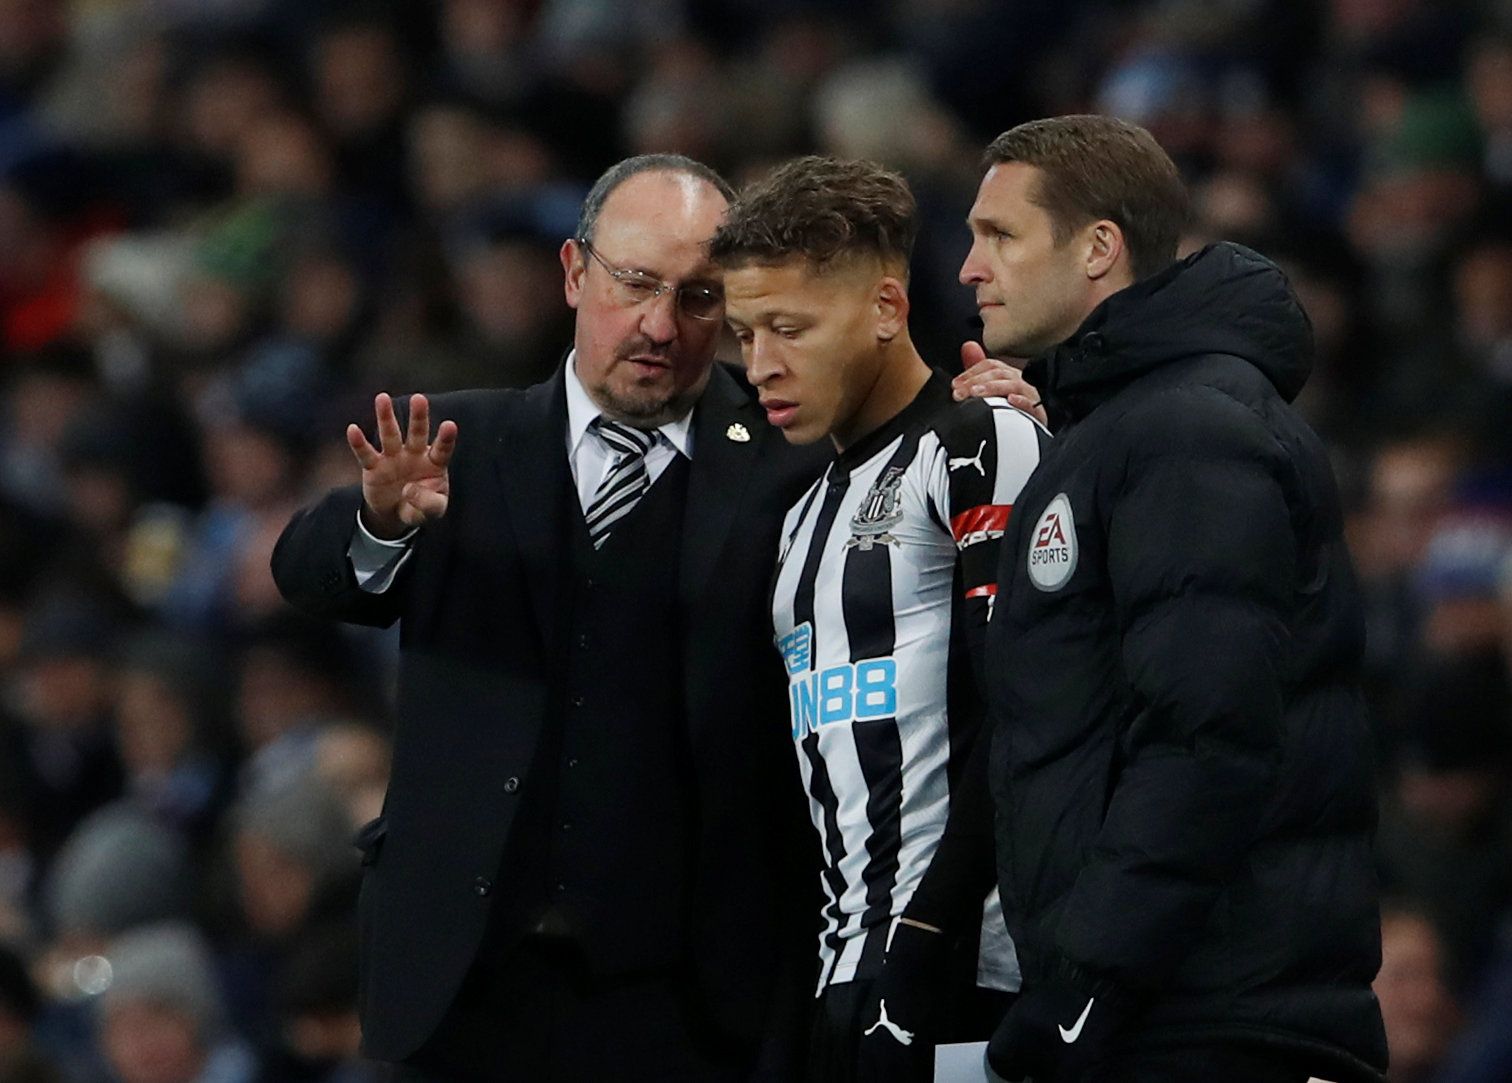 Soccer Football - Premier League - Manchester City vs Newcastle United - Etihad Stadium, Manchester, Britain - January 20, 2018   Newcastle United's Dwight Gayle talks to manager Rafael Benitez as he prepares to come on      Action Images via Reuters/Lee Smith    EDITORIAL USE ONLY. No use with unauthorized audio, video, data, fixture lists, club/league logos or "live" services. Online in-match use limited to 75 images, no video emulation. No use in betting, games or single club/league/player pu